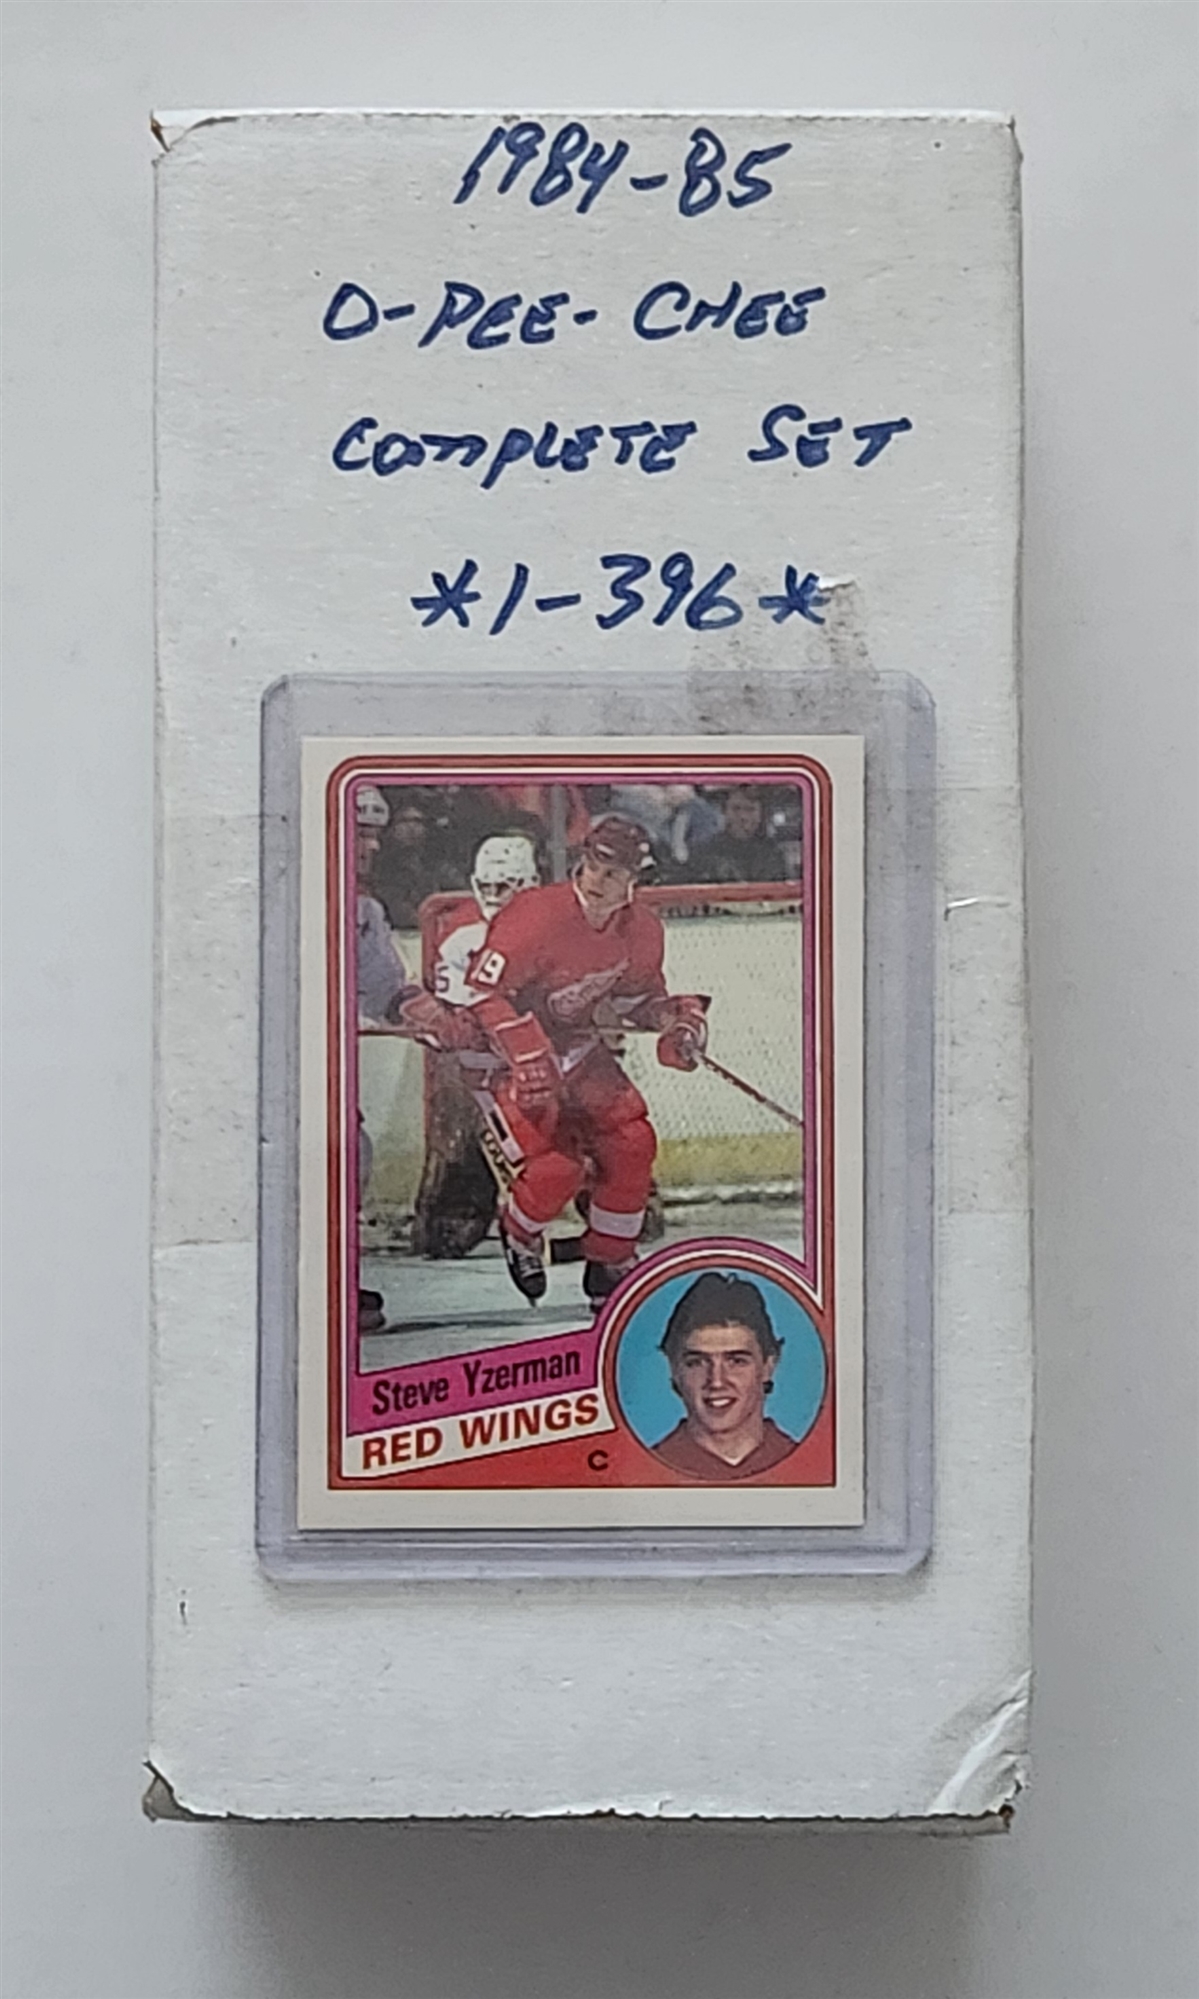 1984-85 O-Pee-Chee Hockey Complete Set with Yzerman Rookie